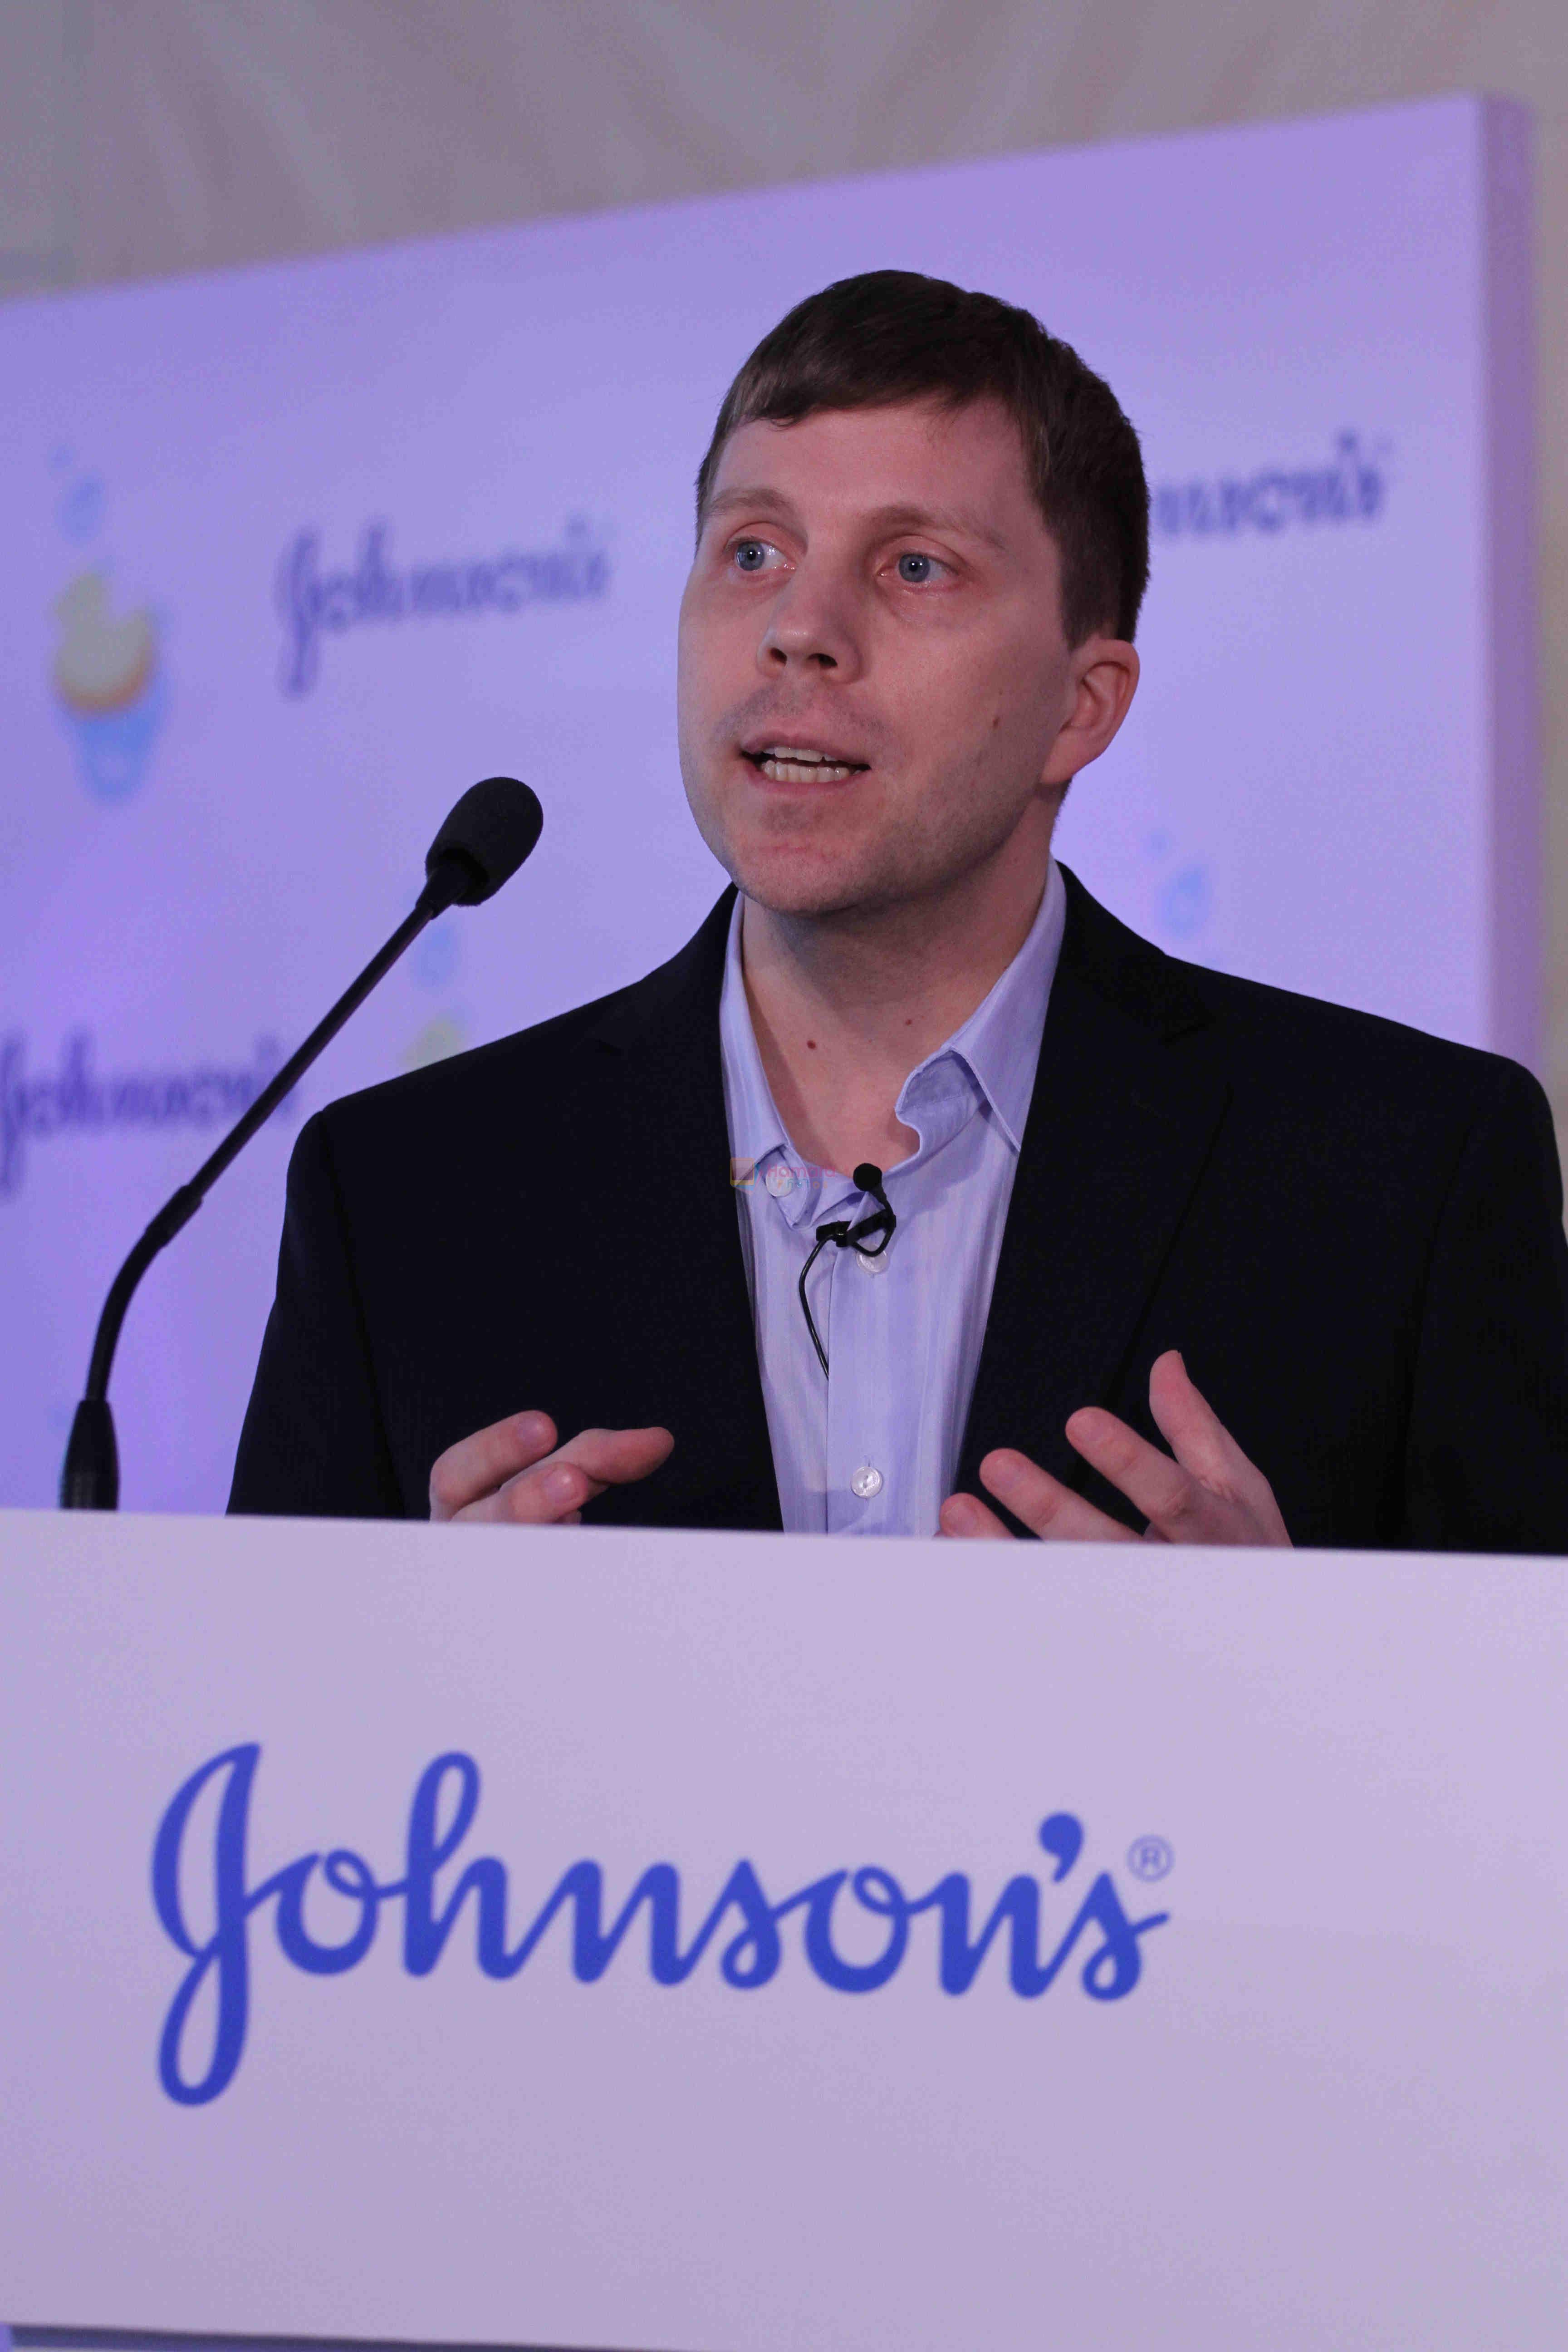 at the Johnson & Johnson press conference on 6th Feb 2015